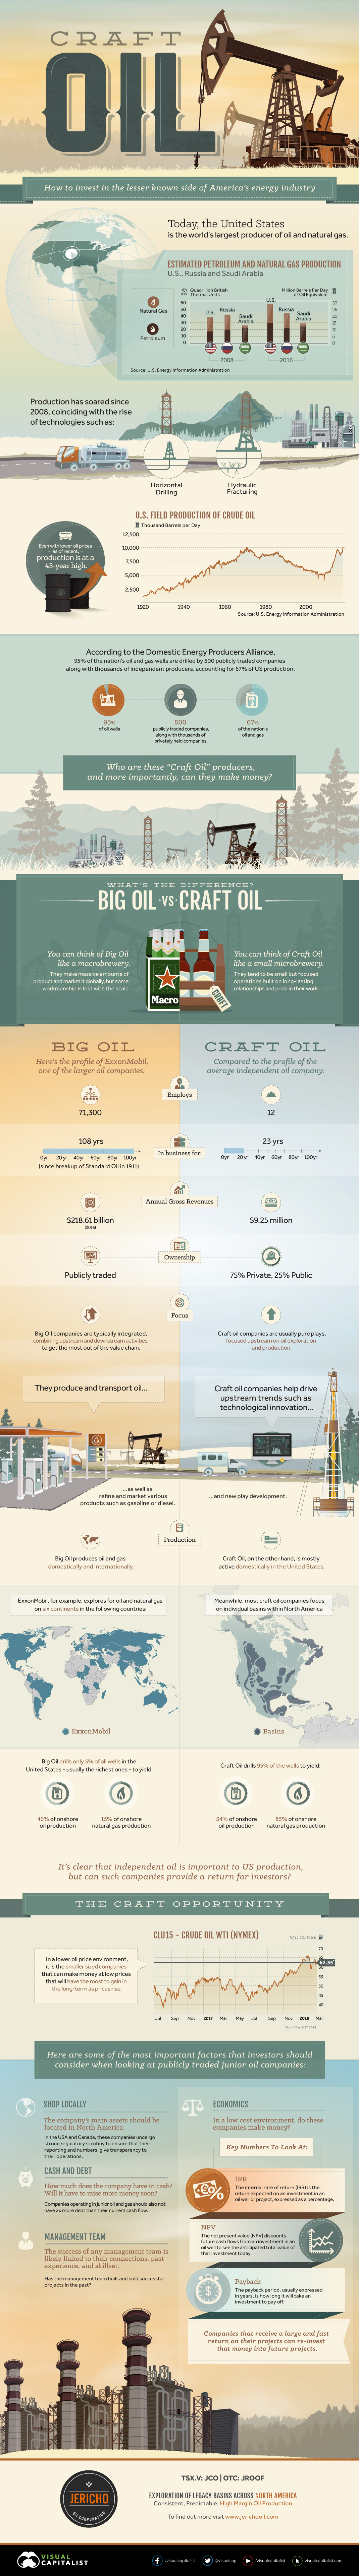 Craft Oil Infographic